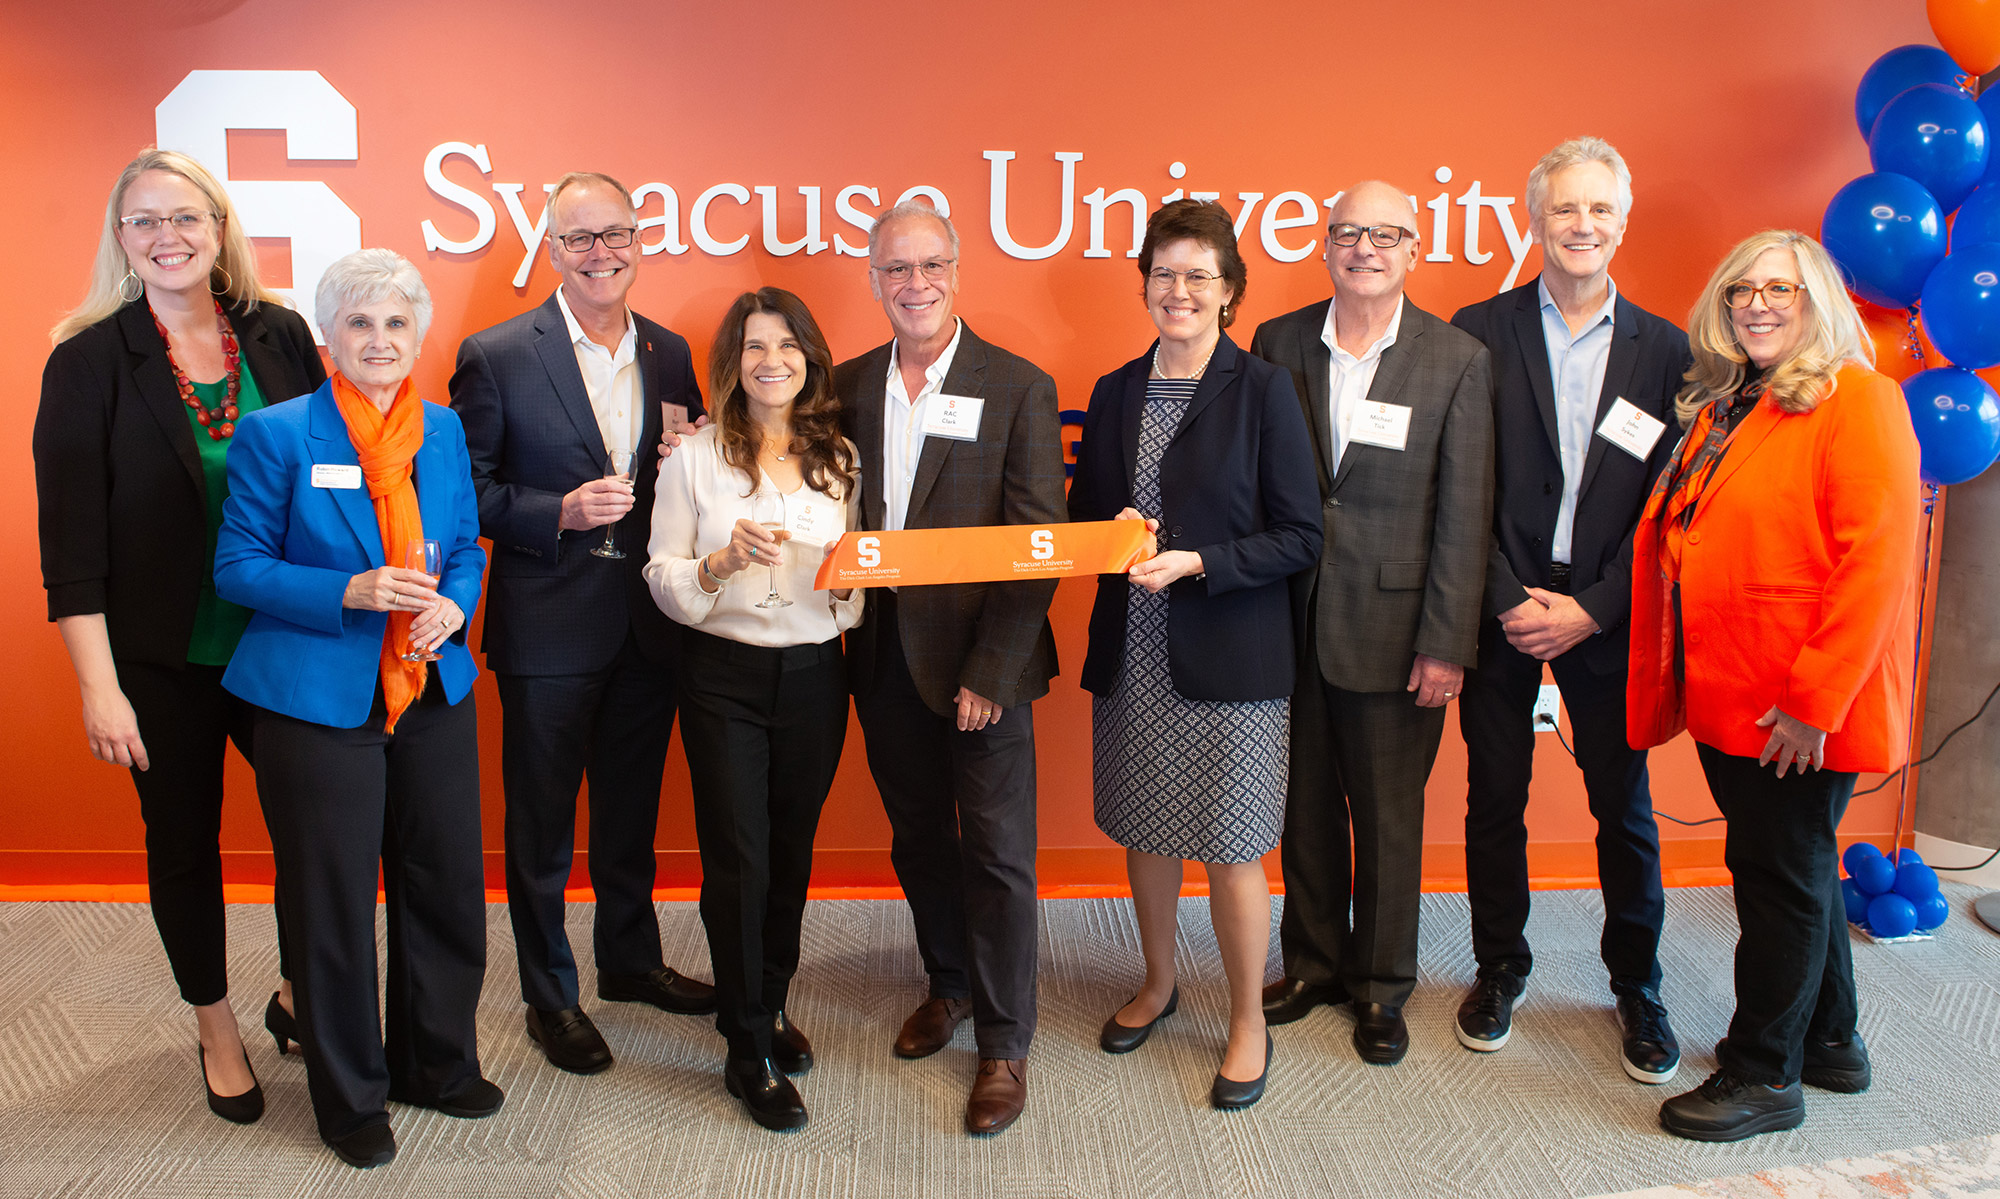 Among those celebrating at the March 2 ribbon-cutting ceremony for the new home of the Syracuse University Dick Clark Los Angeles Program are (from left) Anna Proulx, director of the College of Visual and Performing Arts (VPA) Program, LA Semester;
Robin Howard, director of the Newhouse LA program; 
Newhouse Dean Mark J. Lodato; Cindy Clark ’86; RAC Clark; Provost Gretchen Ritter; VPA Dean Michael S. Tick; John Sykes ’77, president of entertainment enterprises for iHeartMedia; and 
Joan Adler, University assistant vice president of regional programs in Los Angeles.